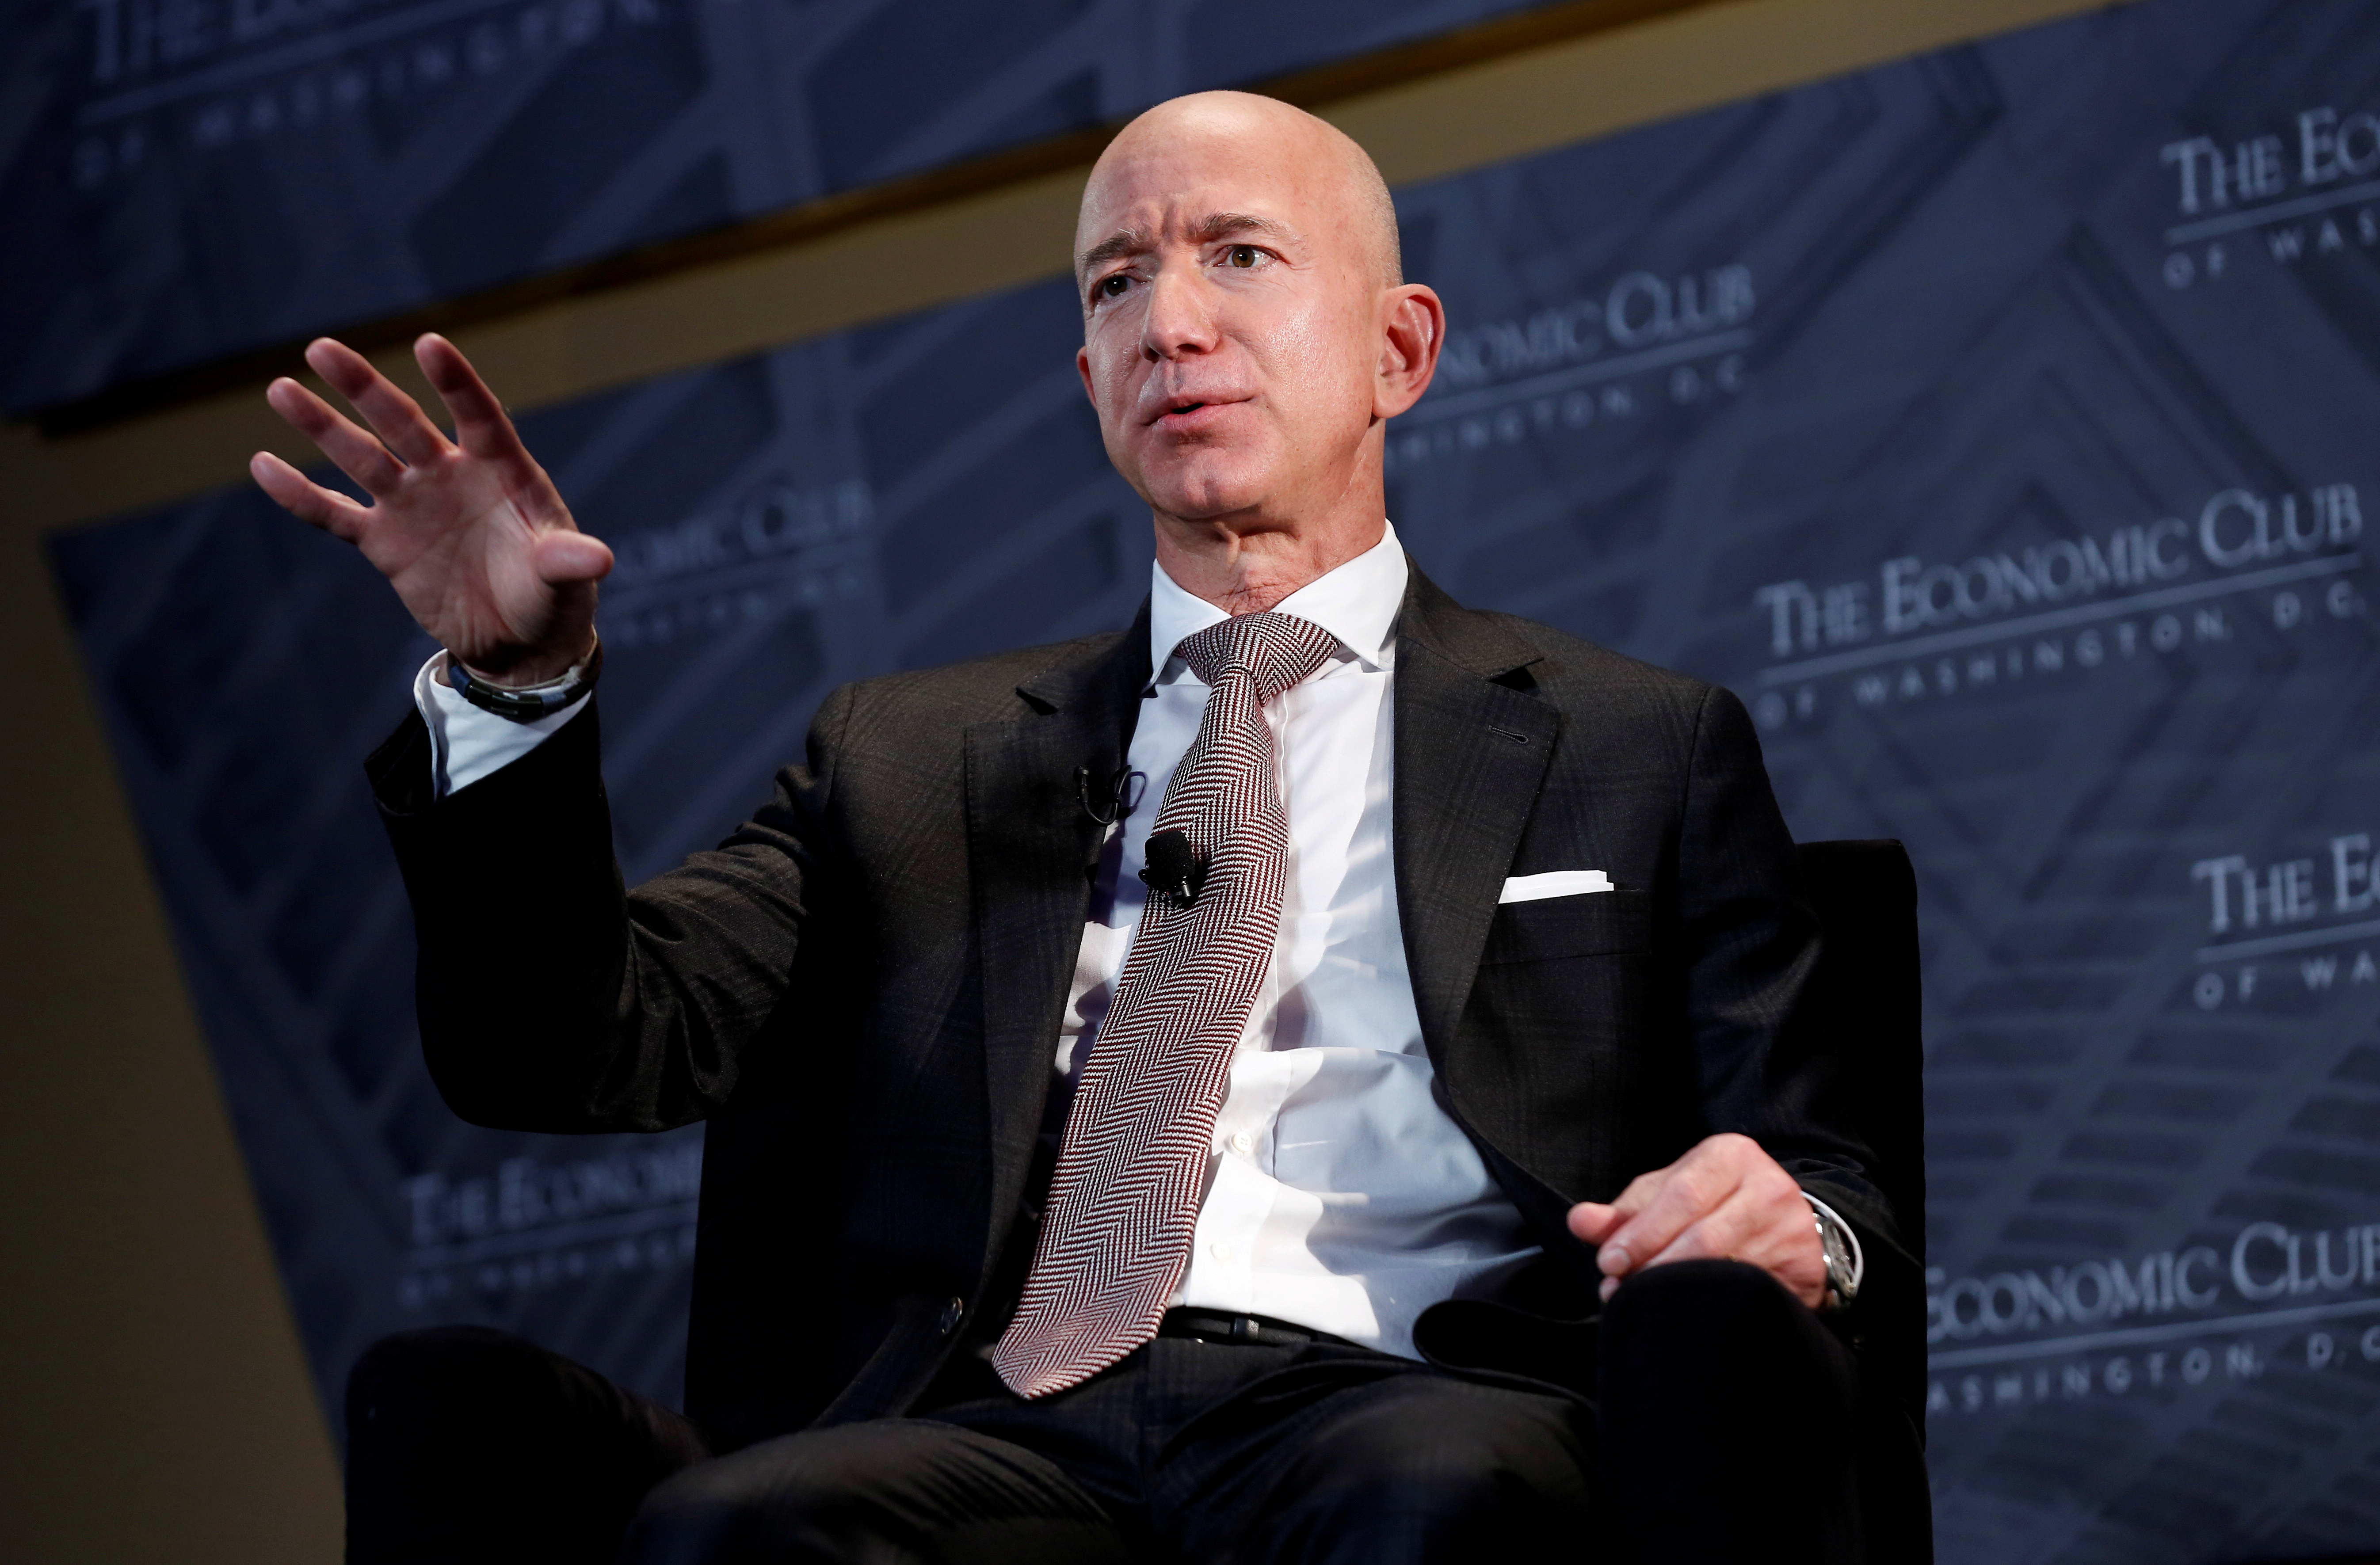 Jeff Bezos, president and CEO of Amazon and owner of The Washington Post, speaks at the Economic Club of Washington DC's 